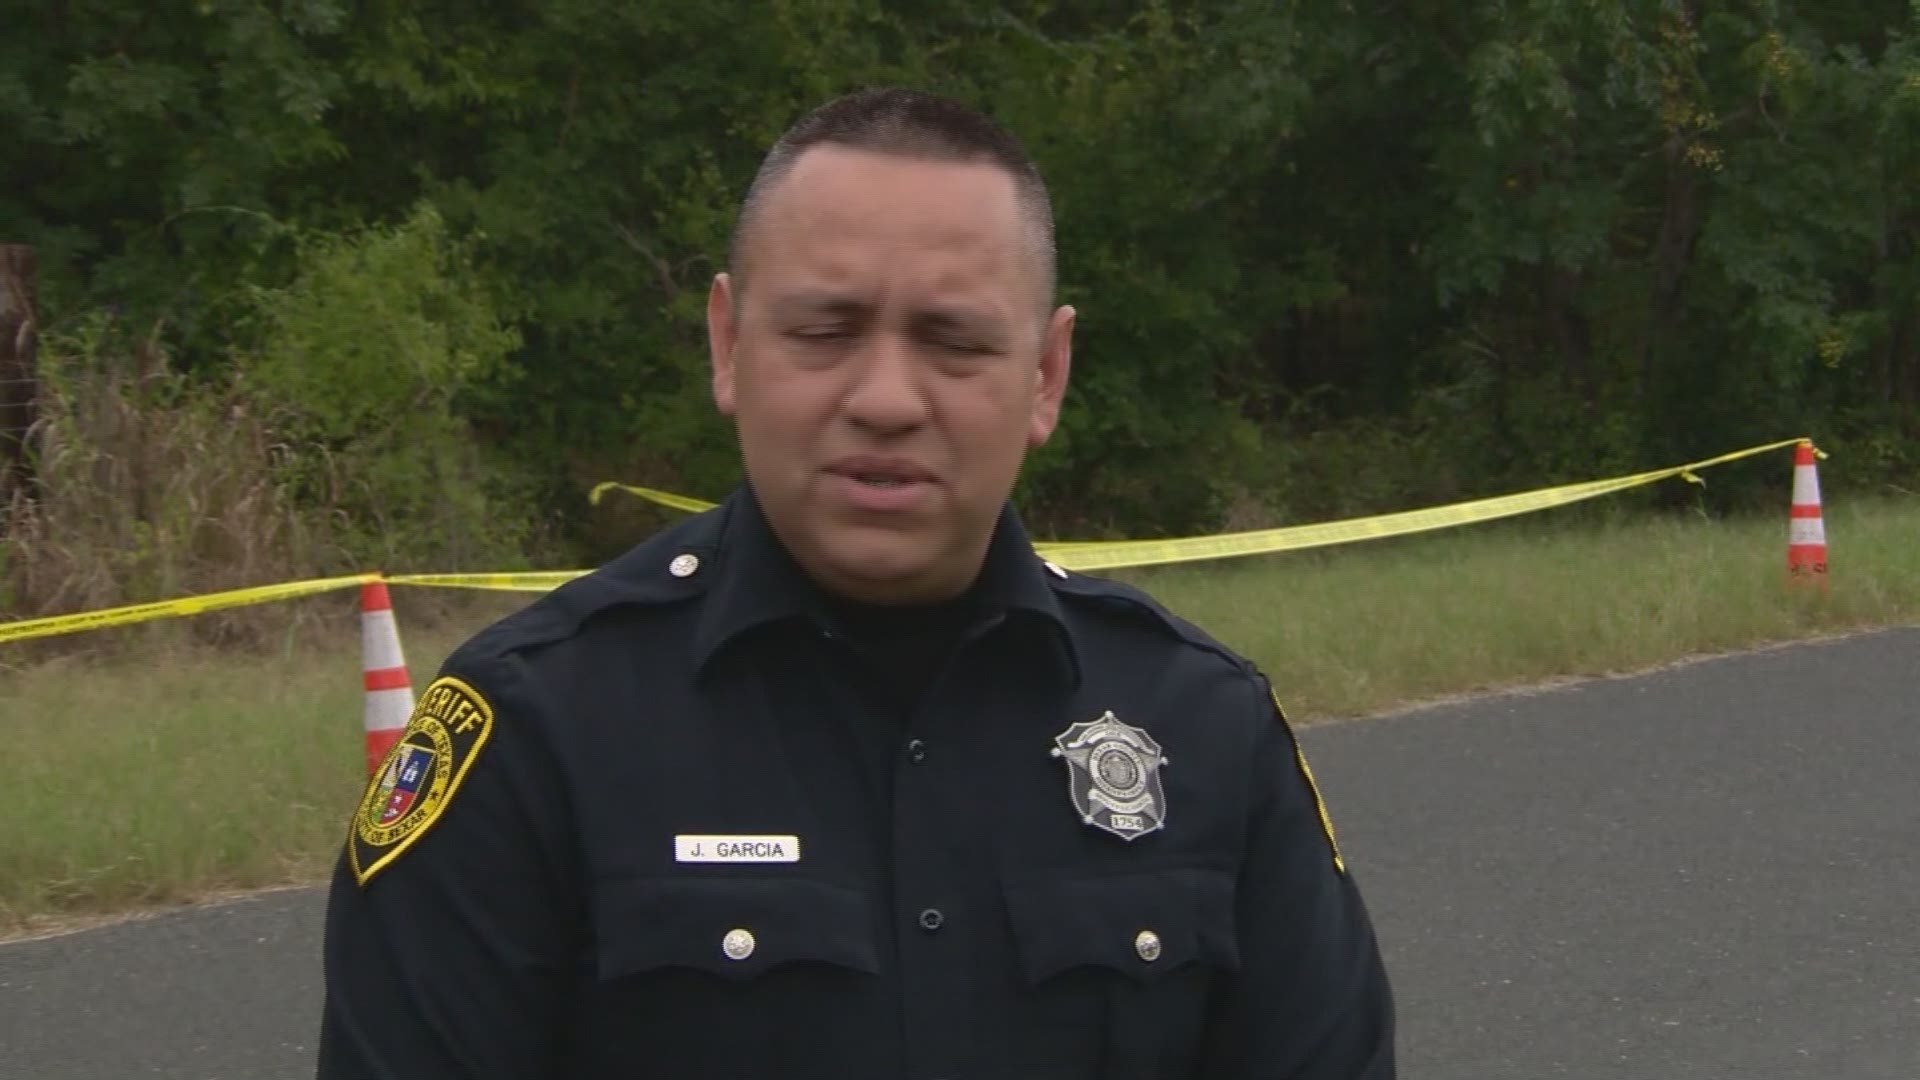 Johnny Garcia with the Bexar County Sheriff's Office provides an update on the human remains that were found in the southwest part of the county Wednesday night.